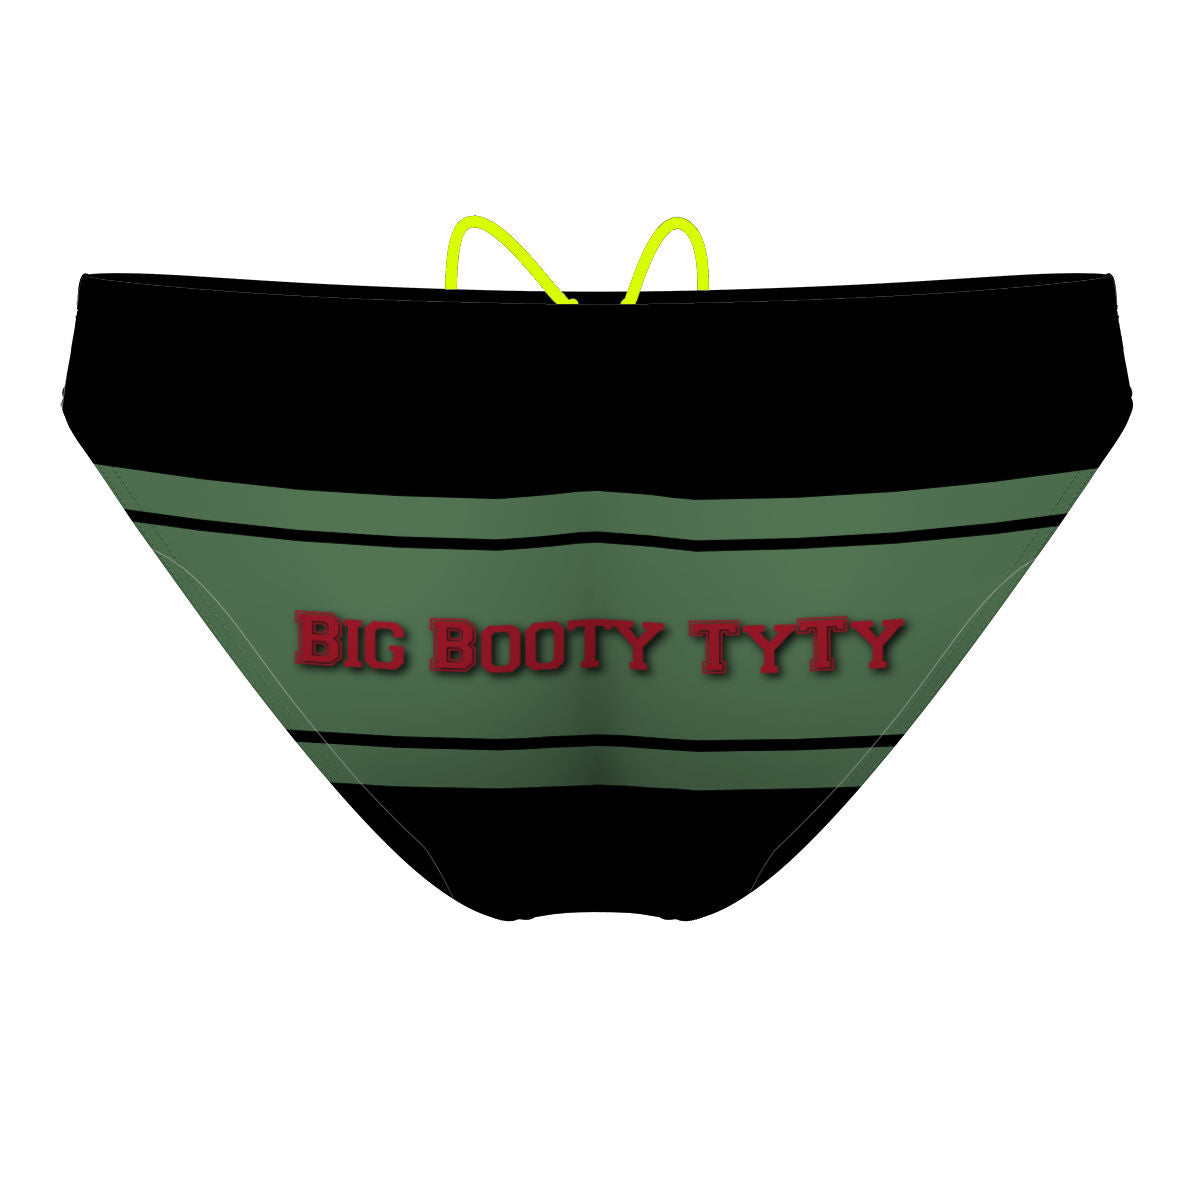 Christmas for tyty - Waterpolo Brief